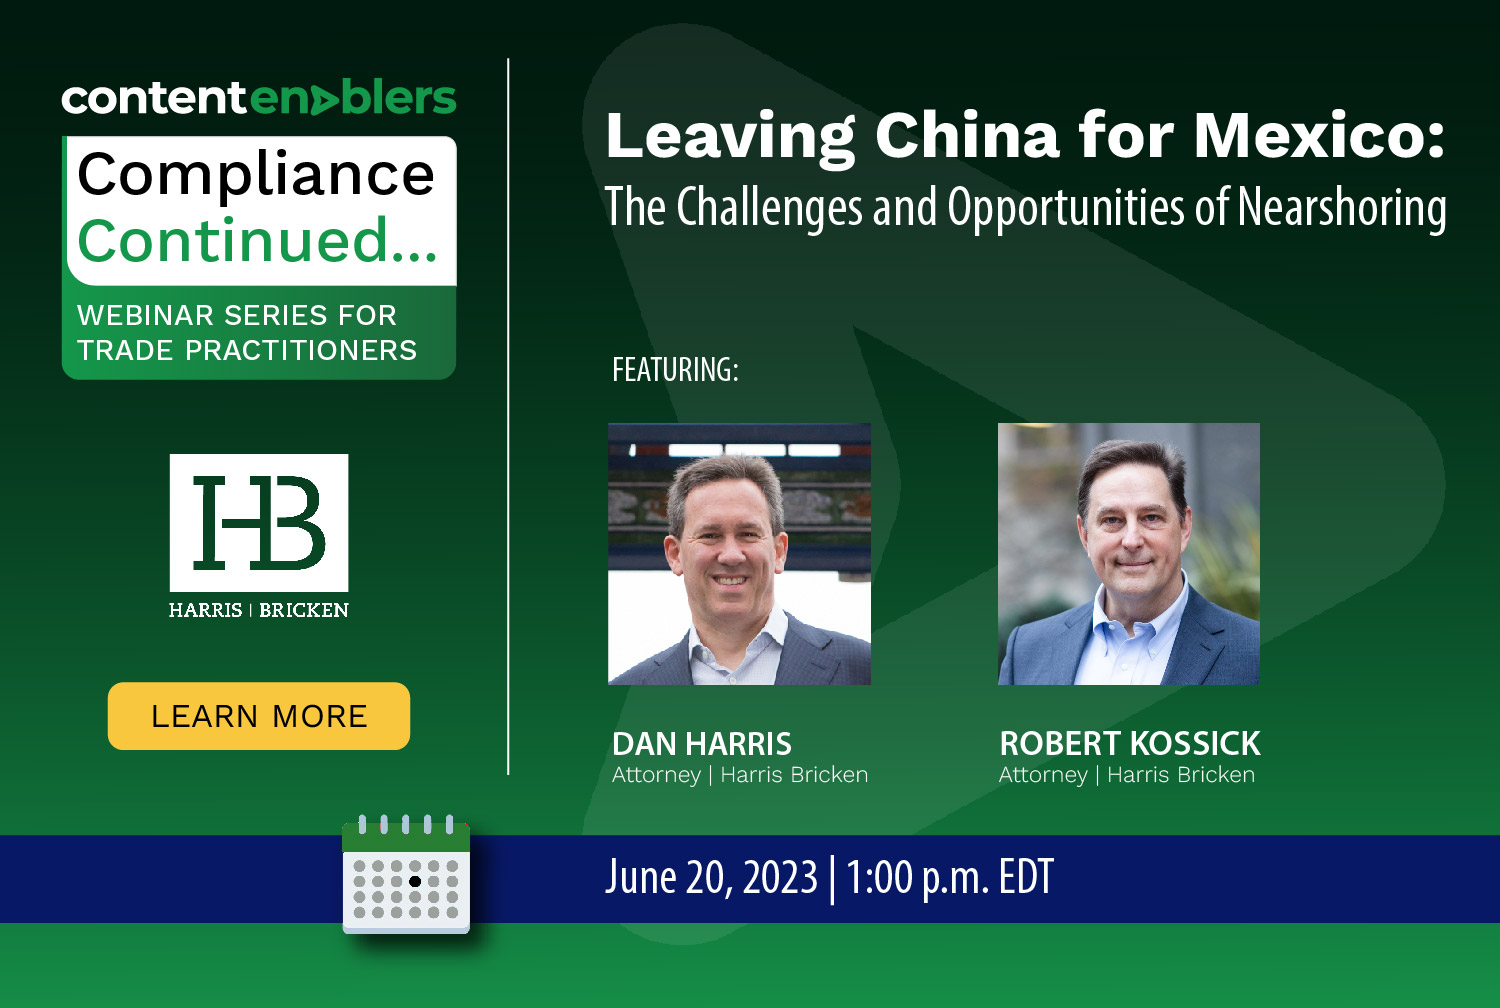 Leaving China for Mexico: The Challenges and the Opportunities